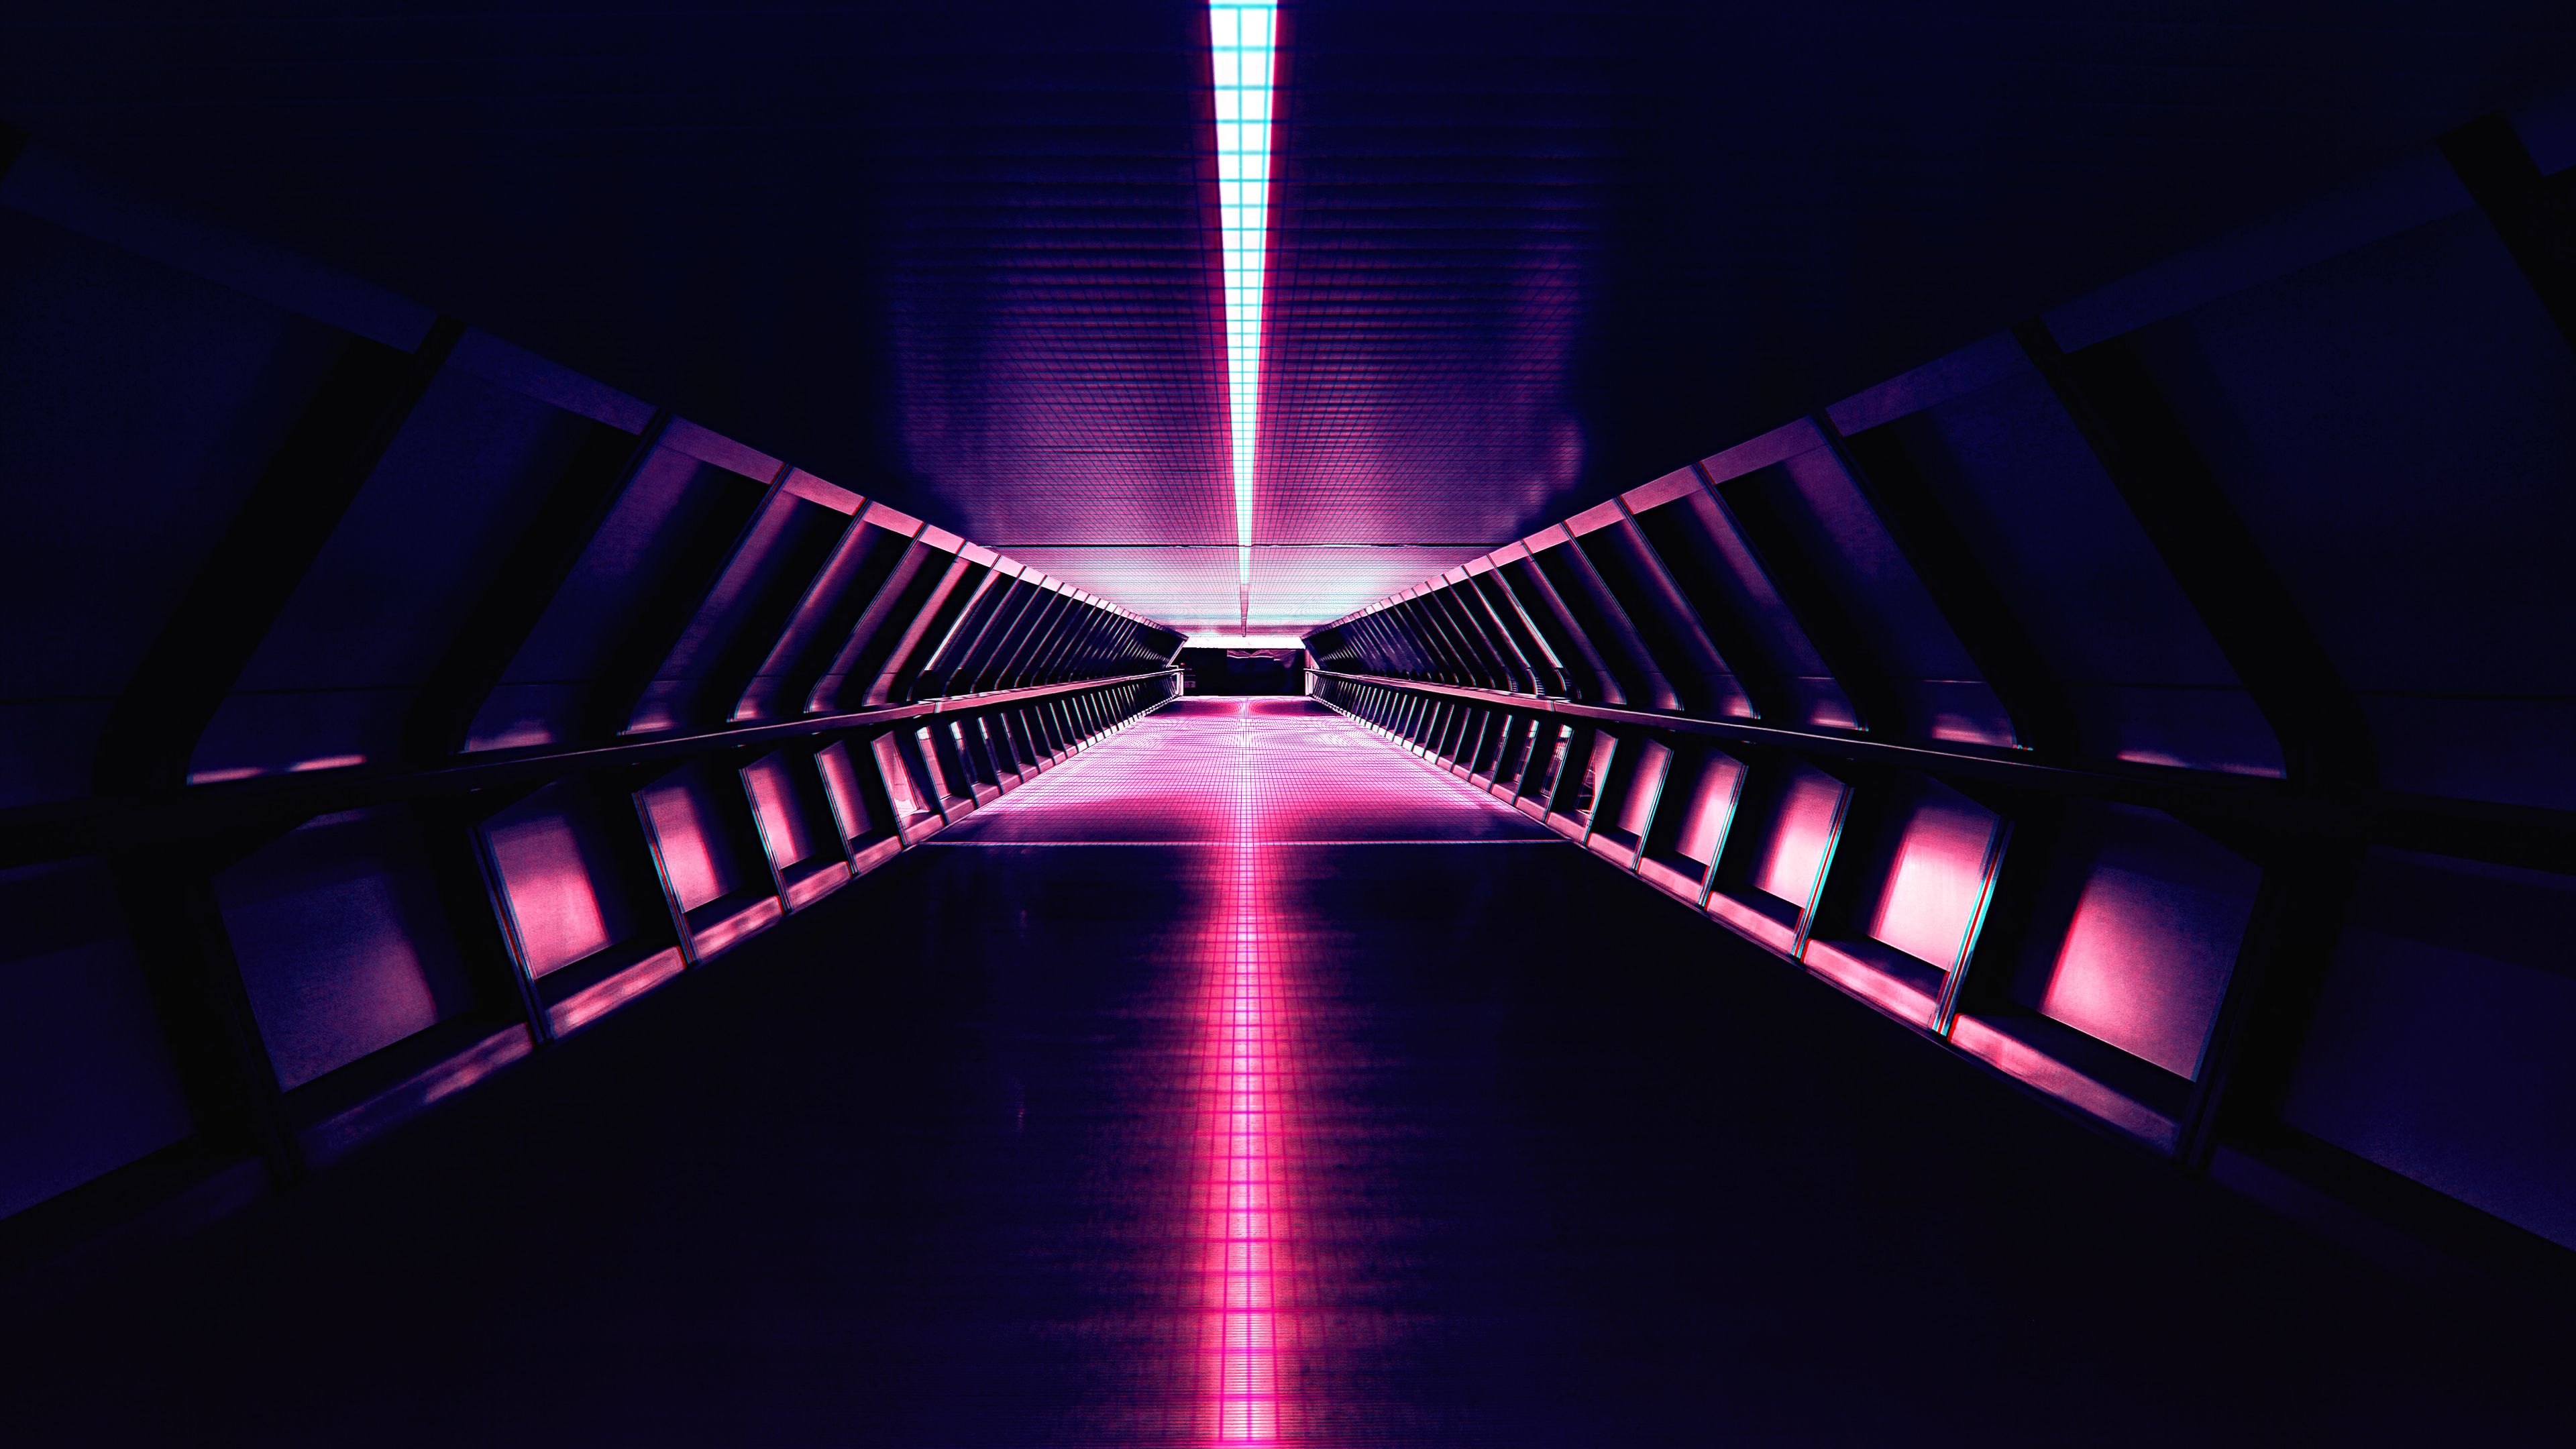 Architecture, Pink, Electronic music, Retro, Purple, Neon, 4K, Synthwave